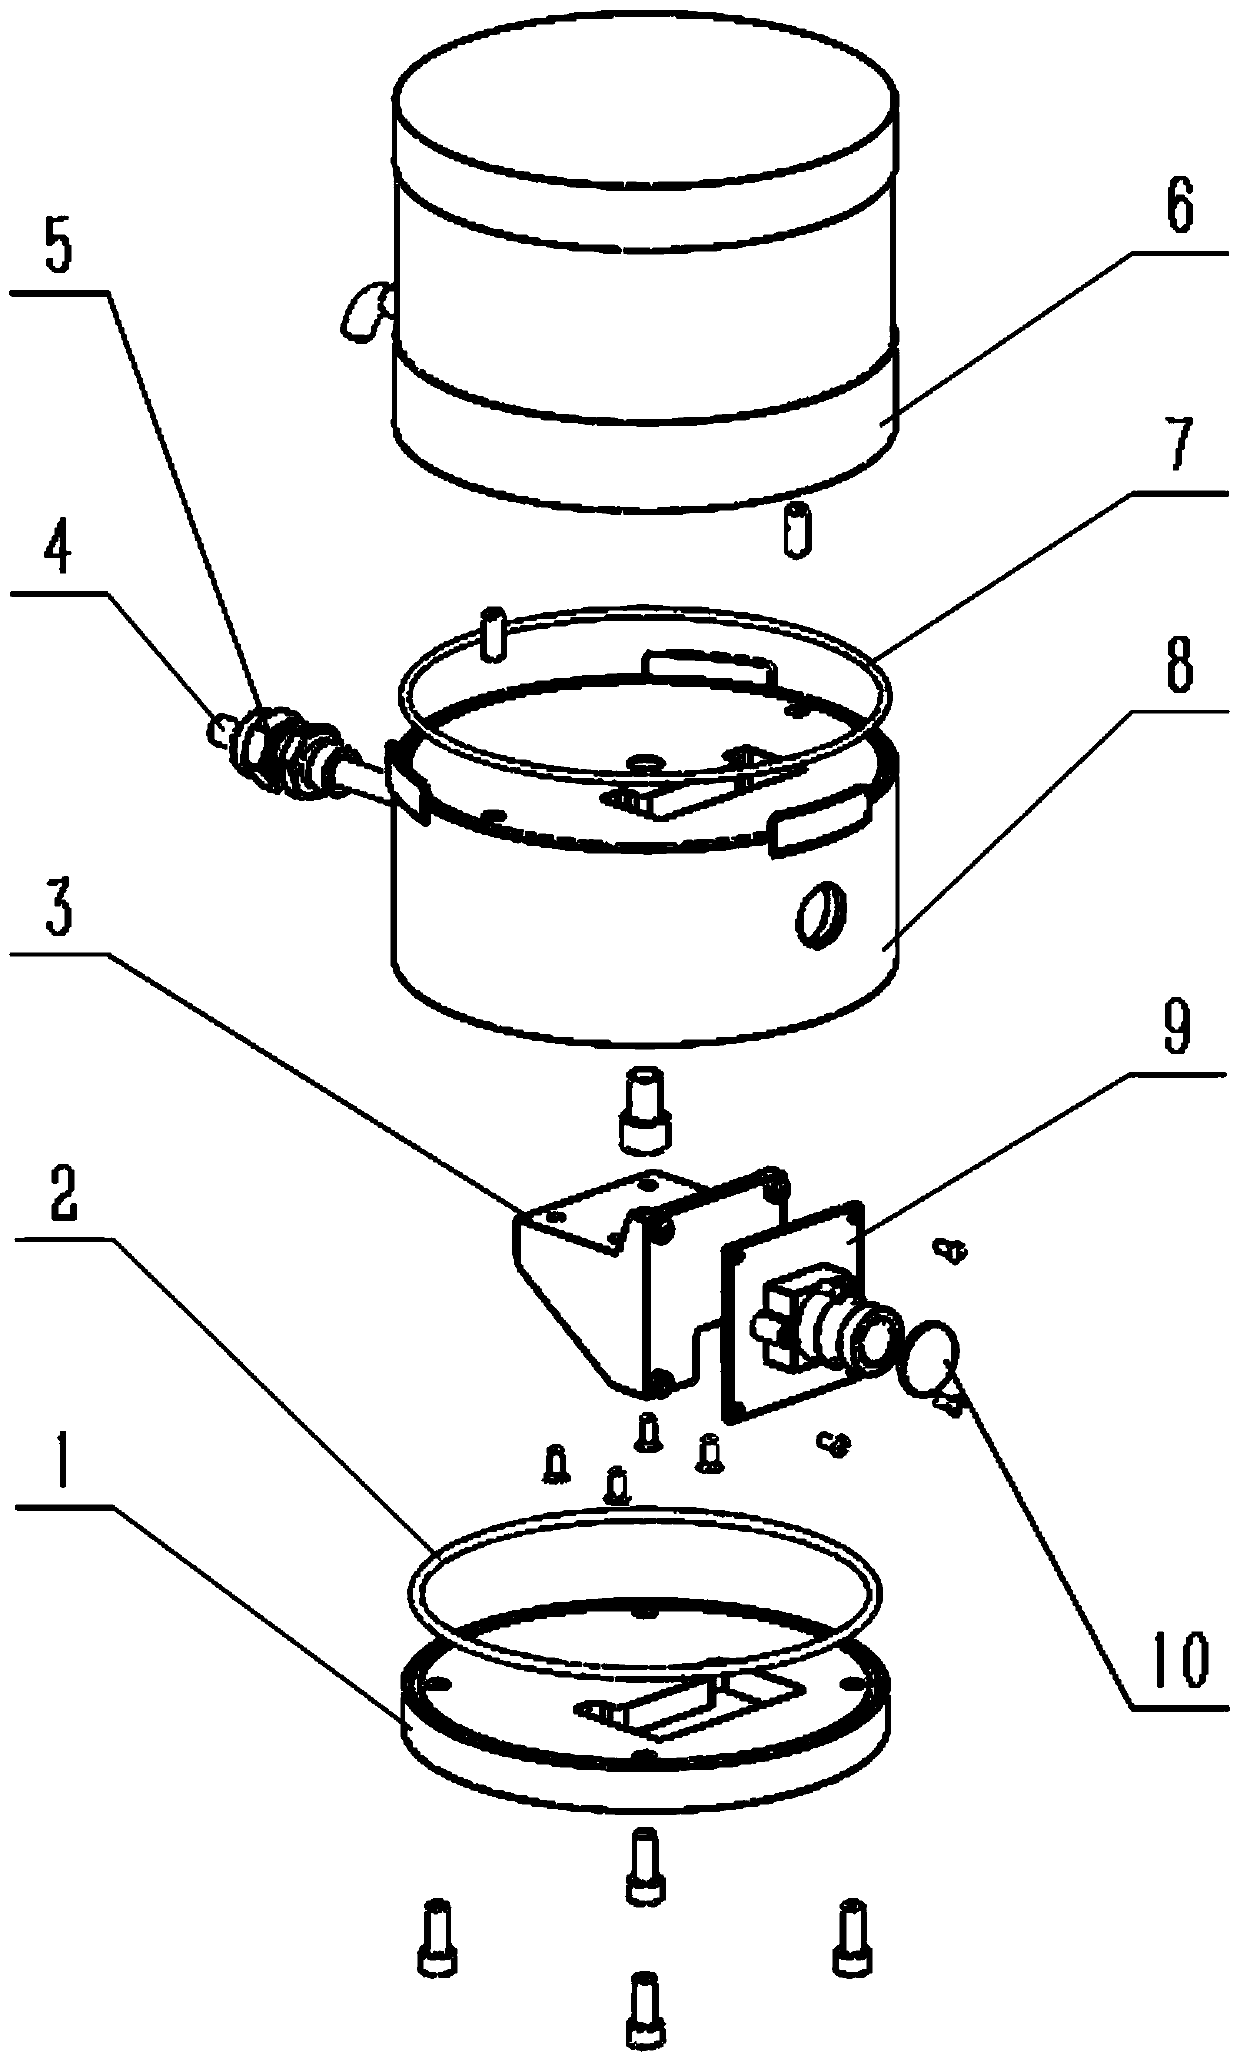 Structure device based on fusion of monocular camera and laser radar